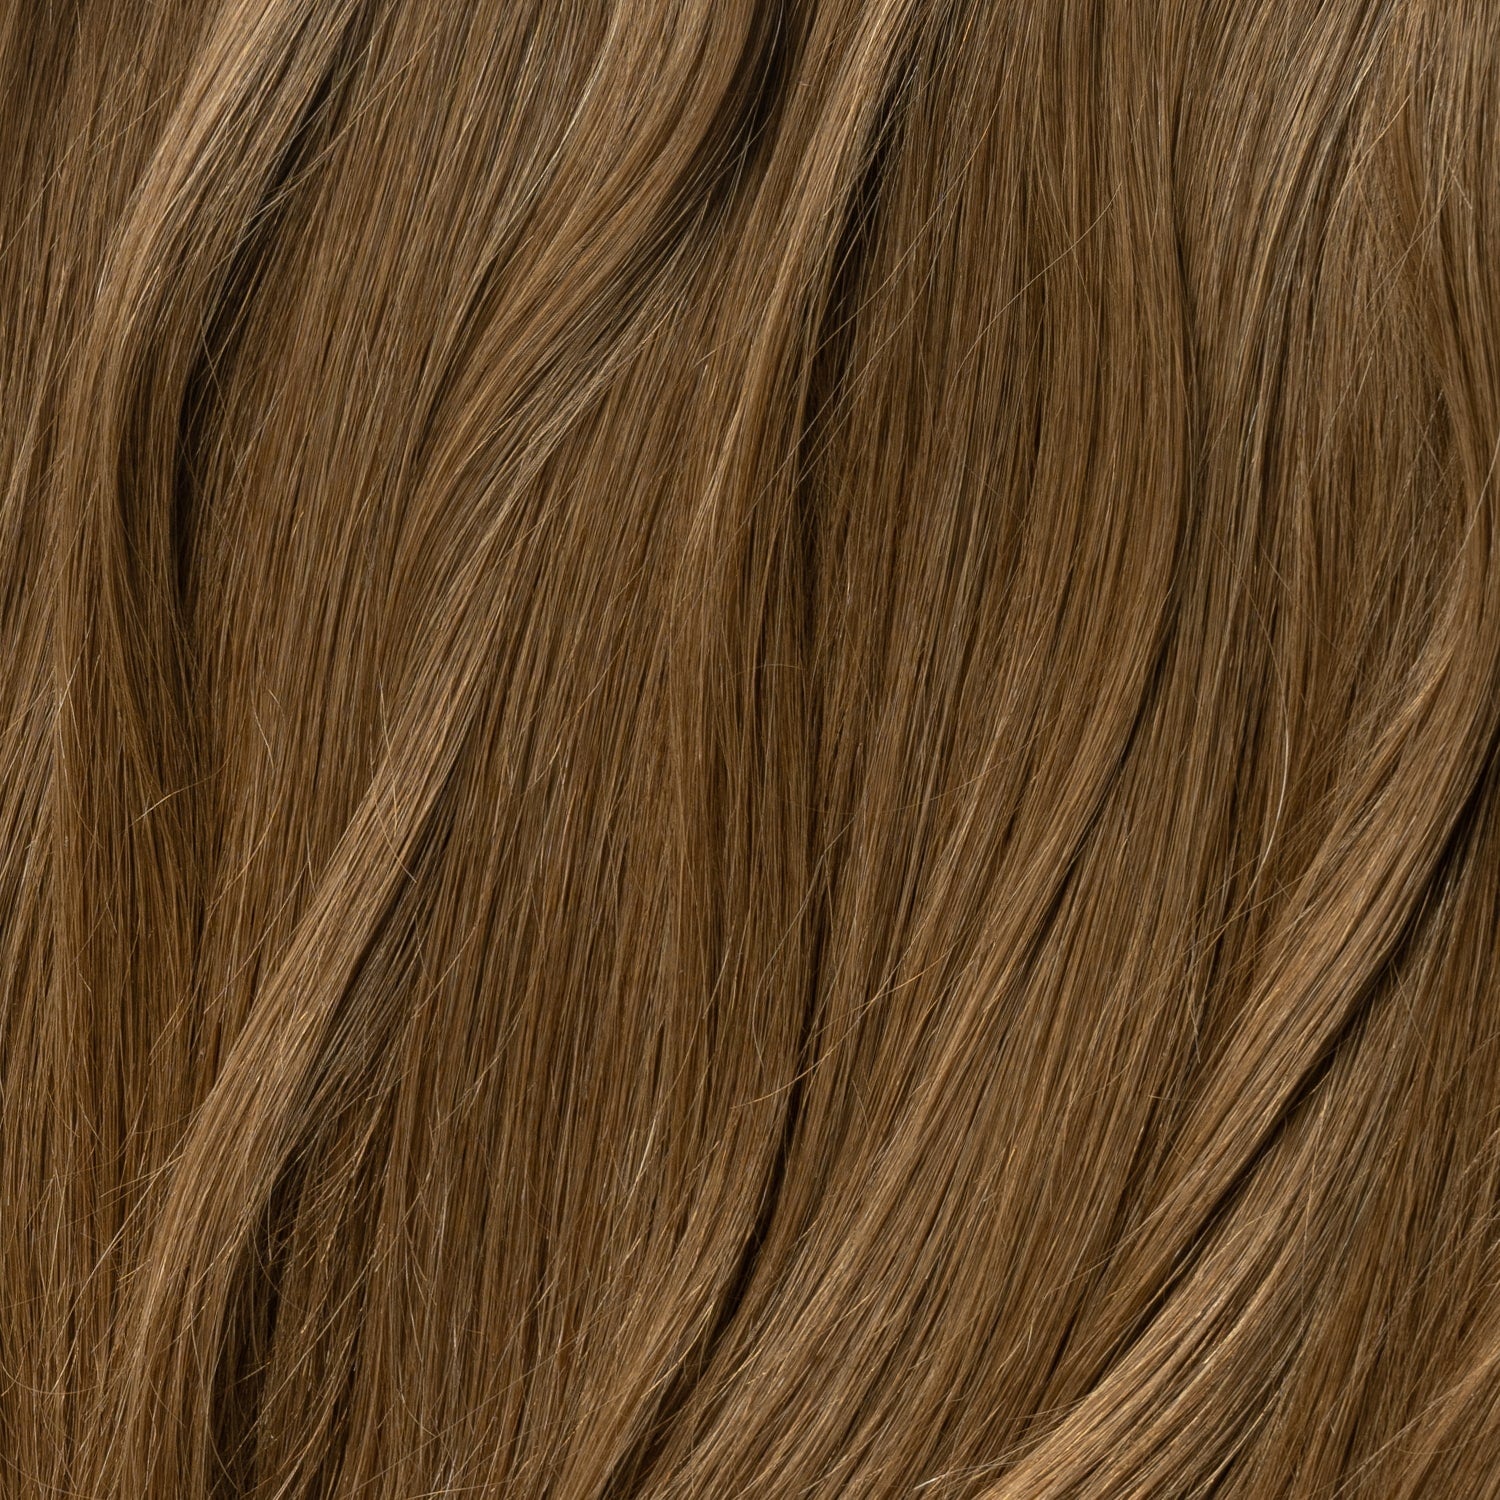 Halo hair extensions - Natural Brown 3